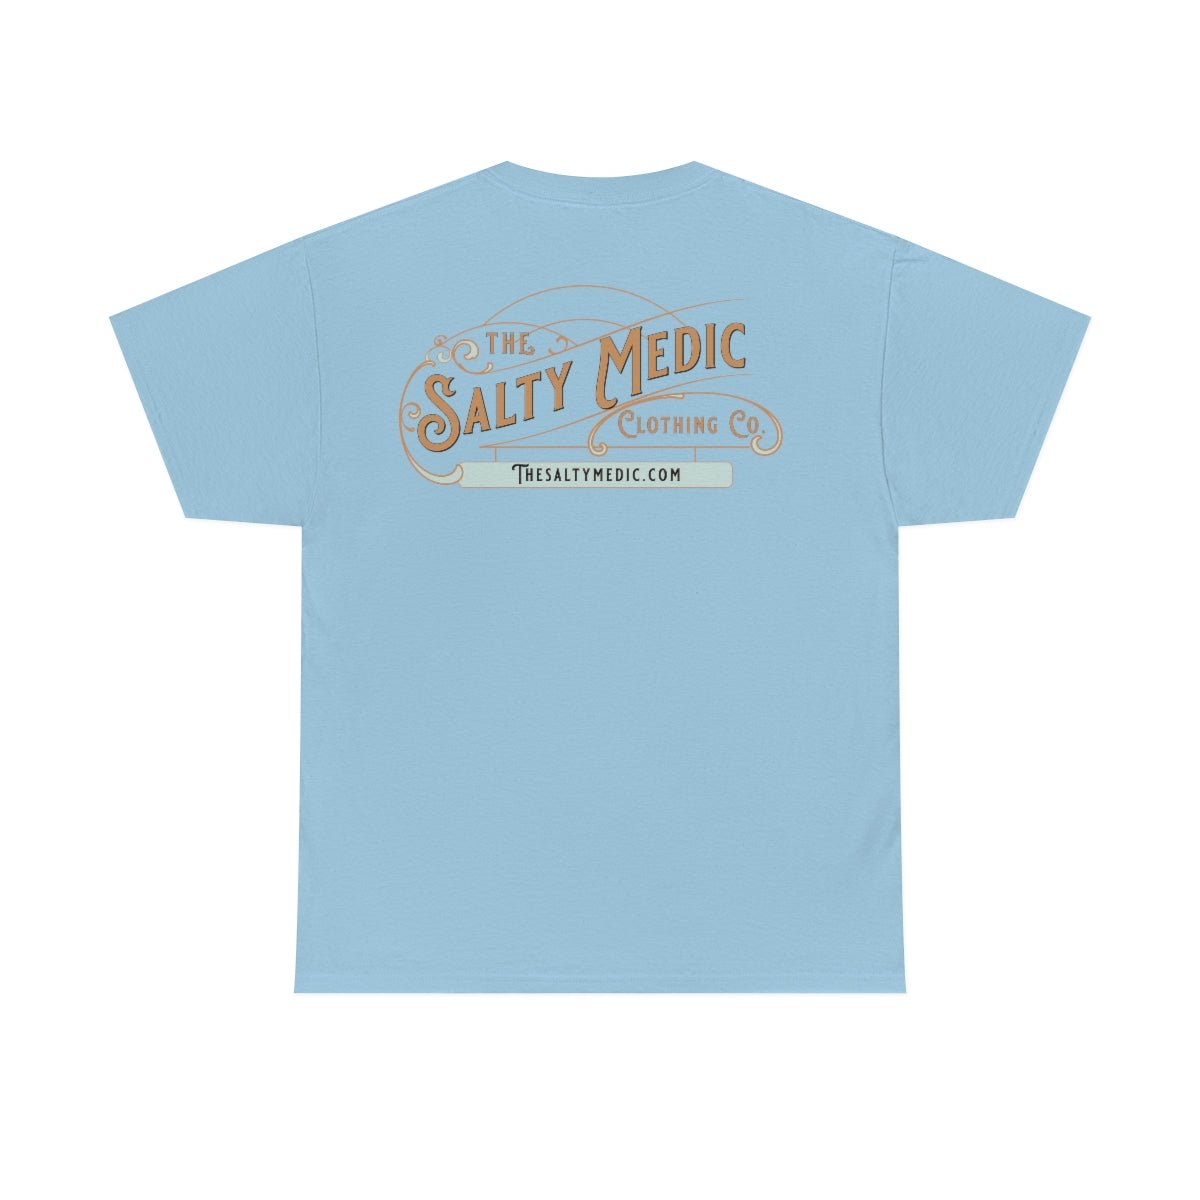 Salty Medic Workin' On My 6 PackHeavy Cotton Tee - Salty Medic Clothing Co.